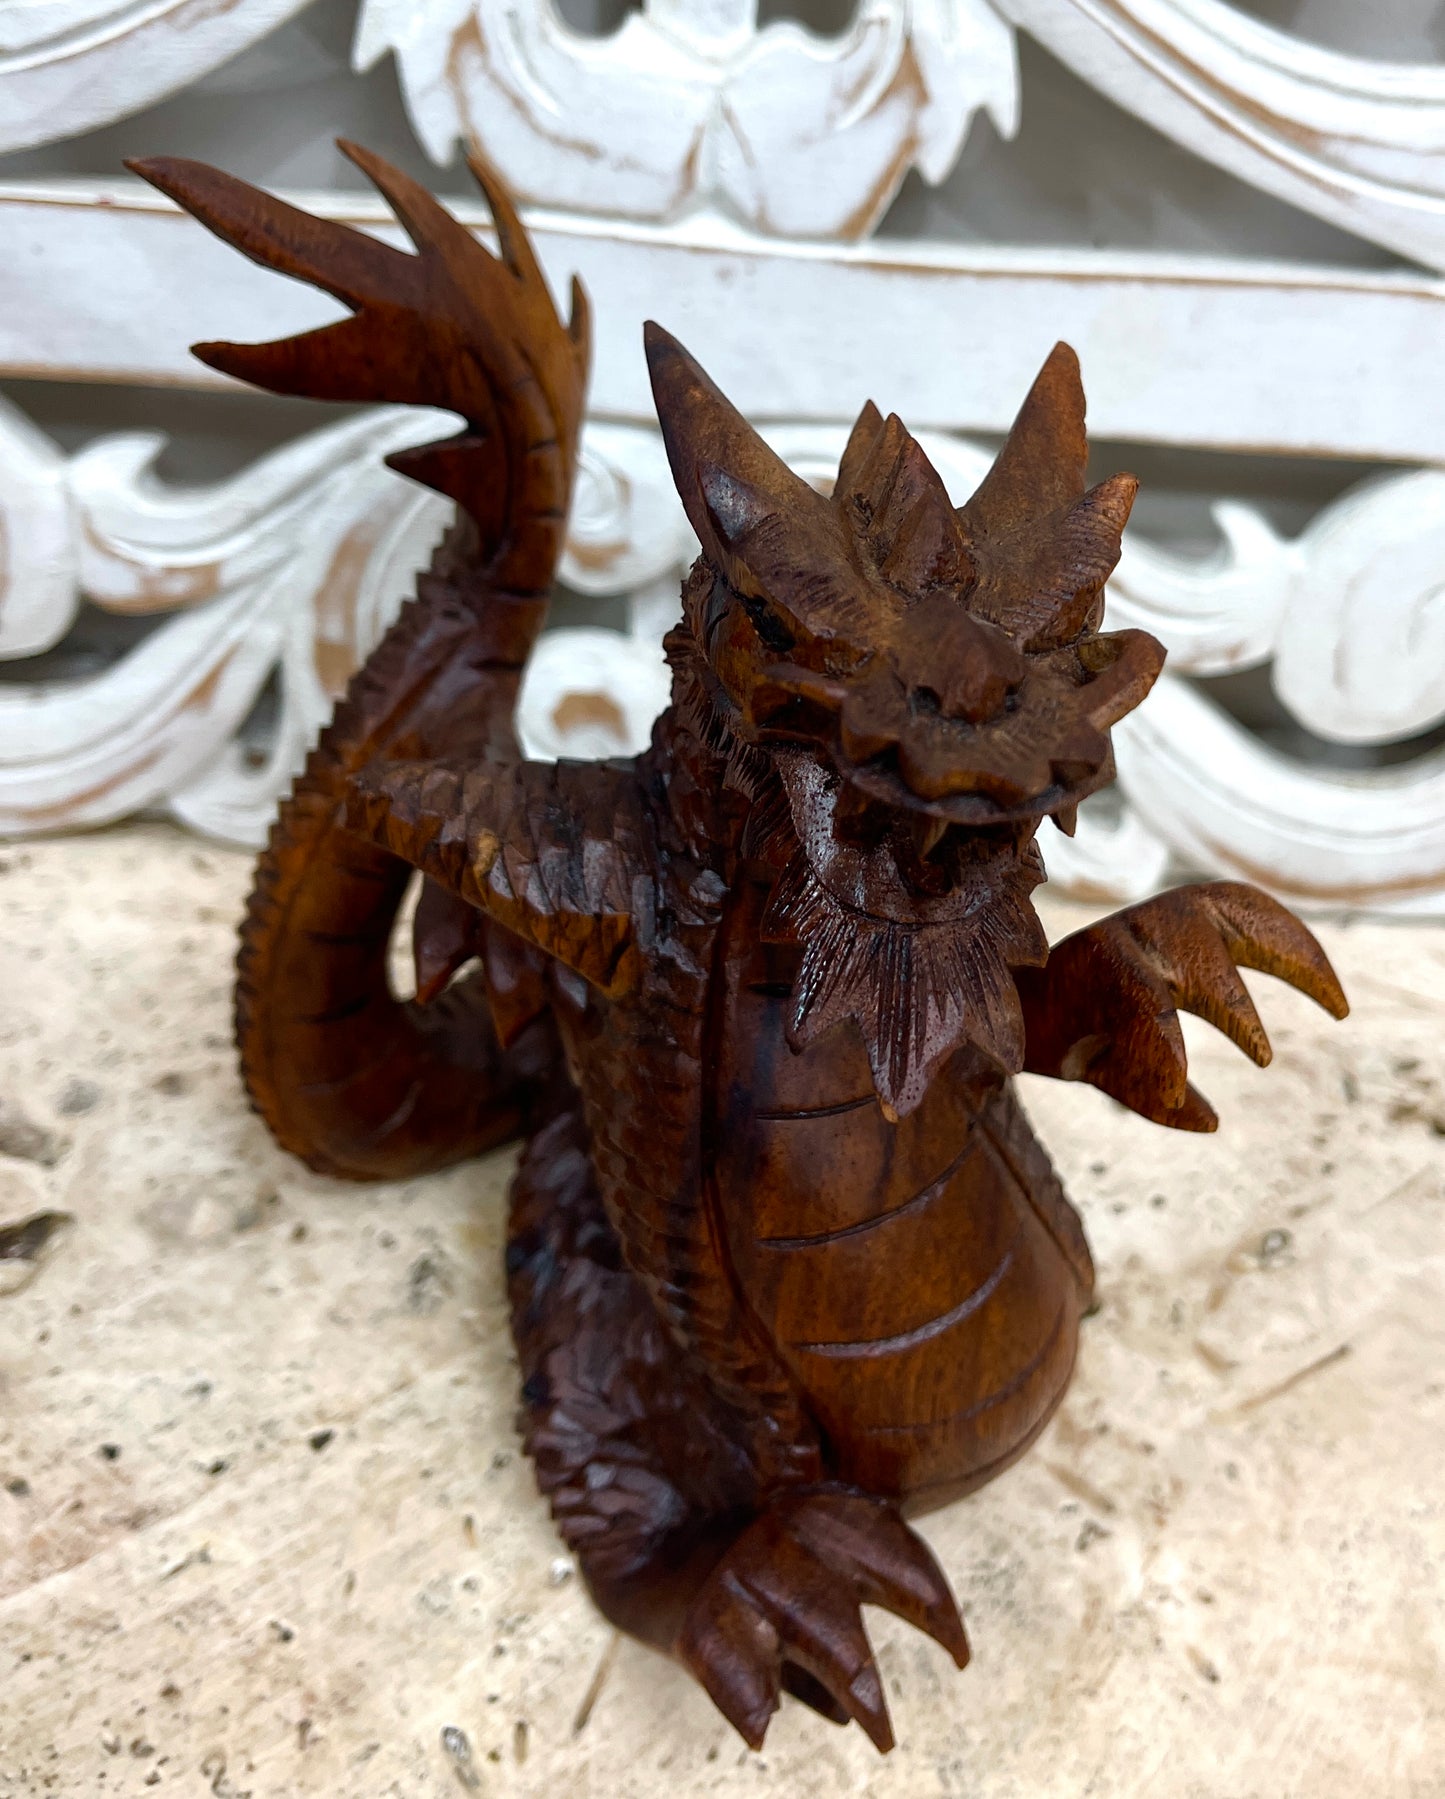 Dragon Intricate Wood Carvings - 3 Sizes